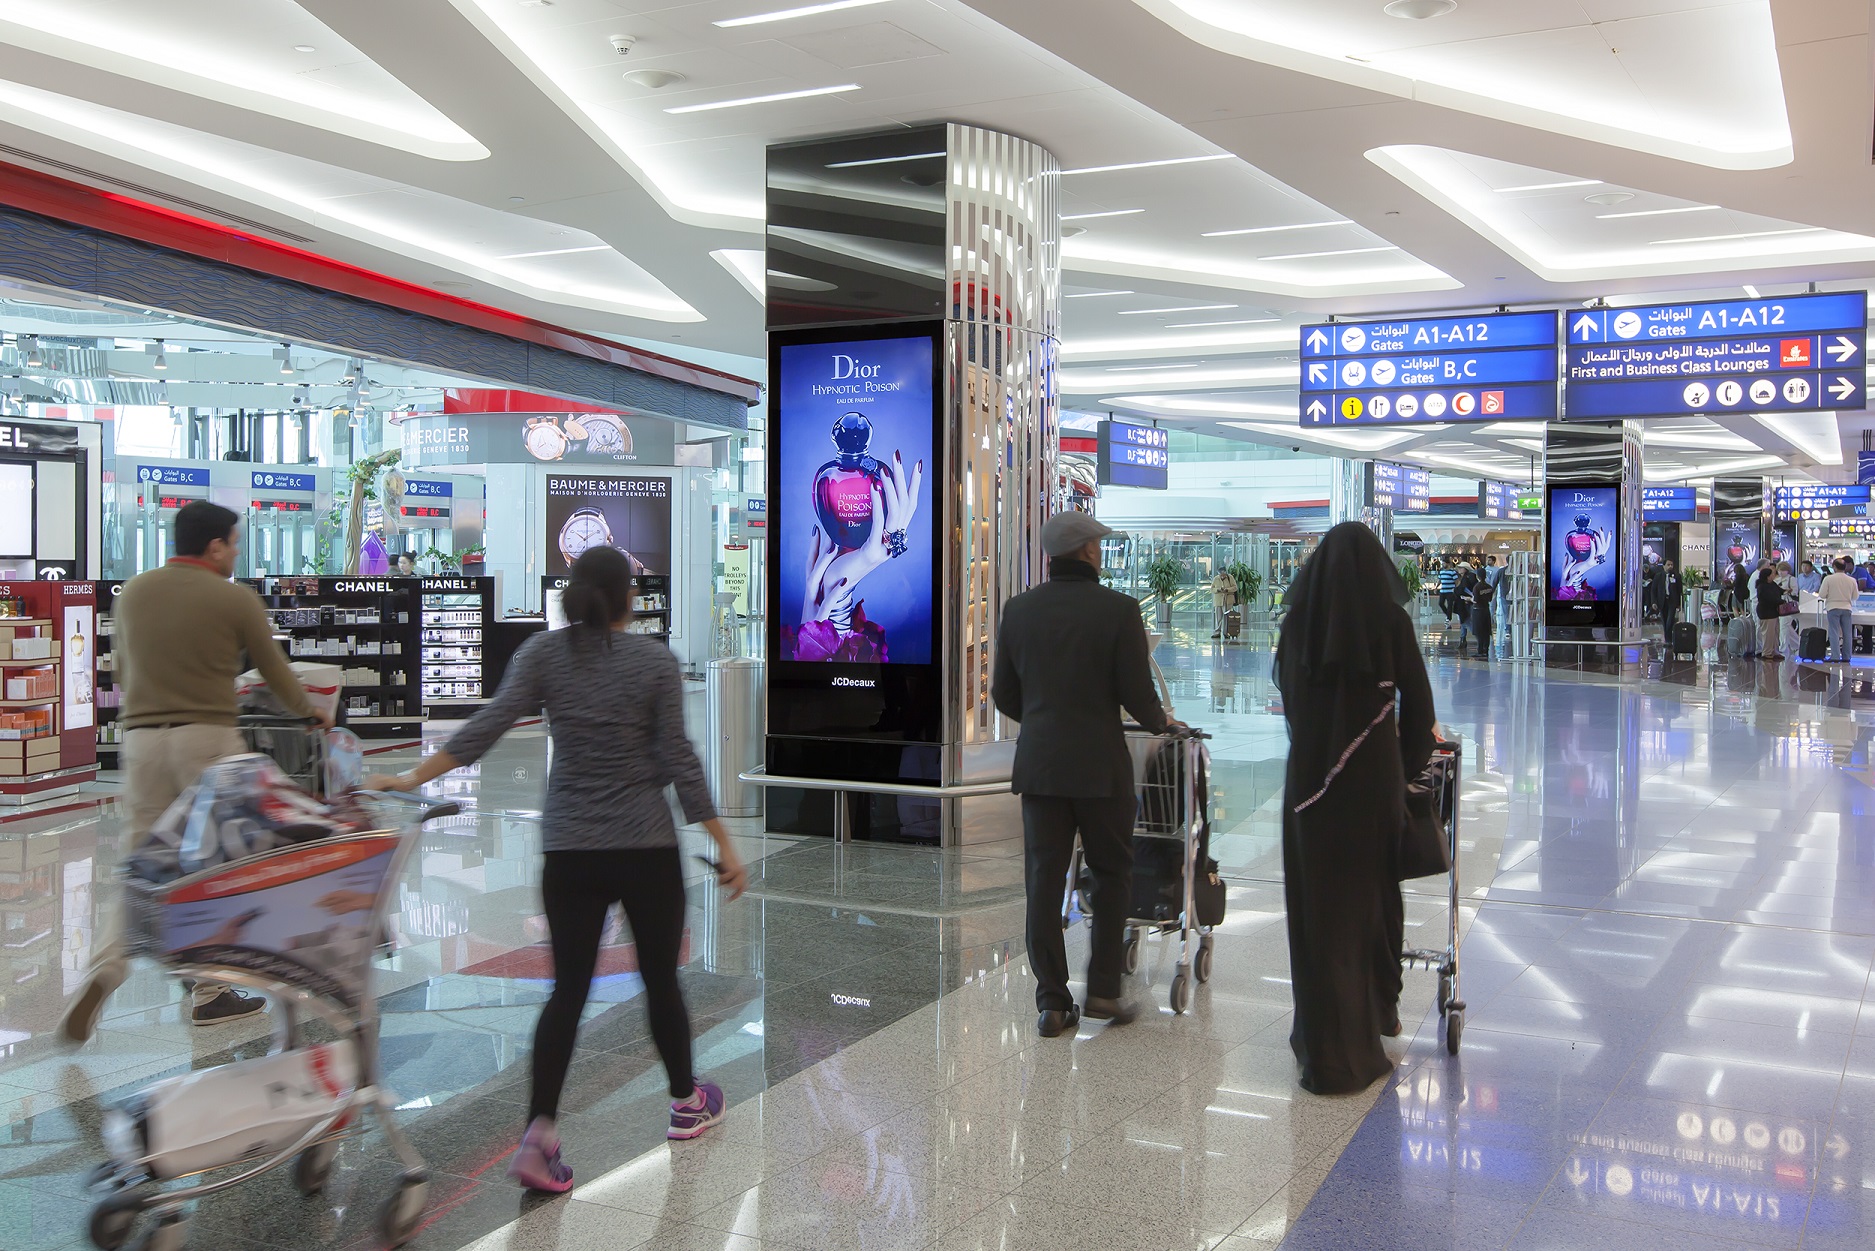 JCDecaux unveils its first digital iVision airport network At Dubai International